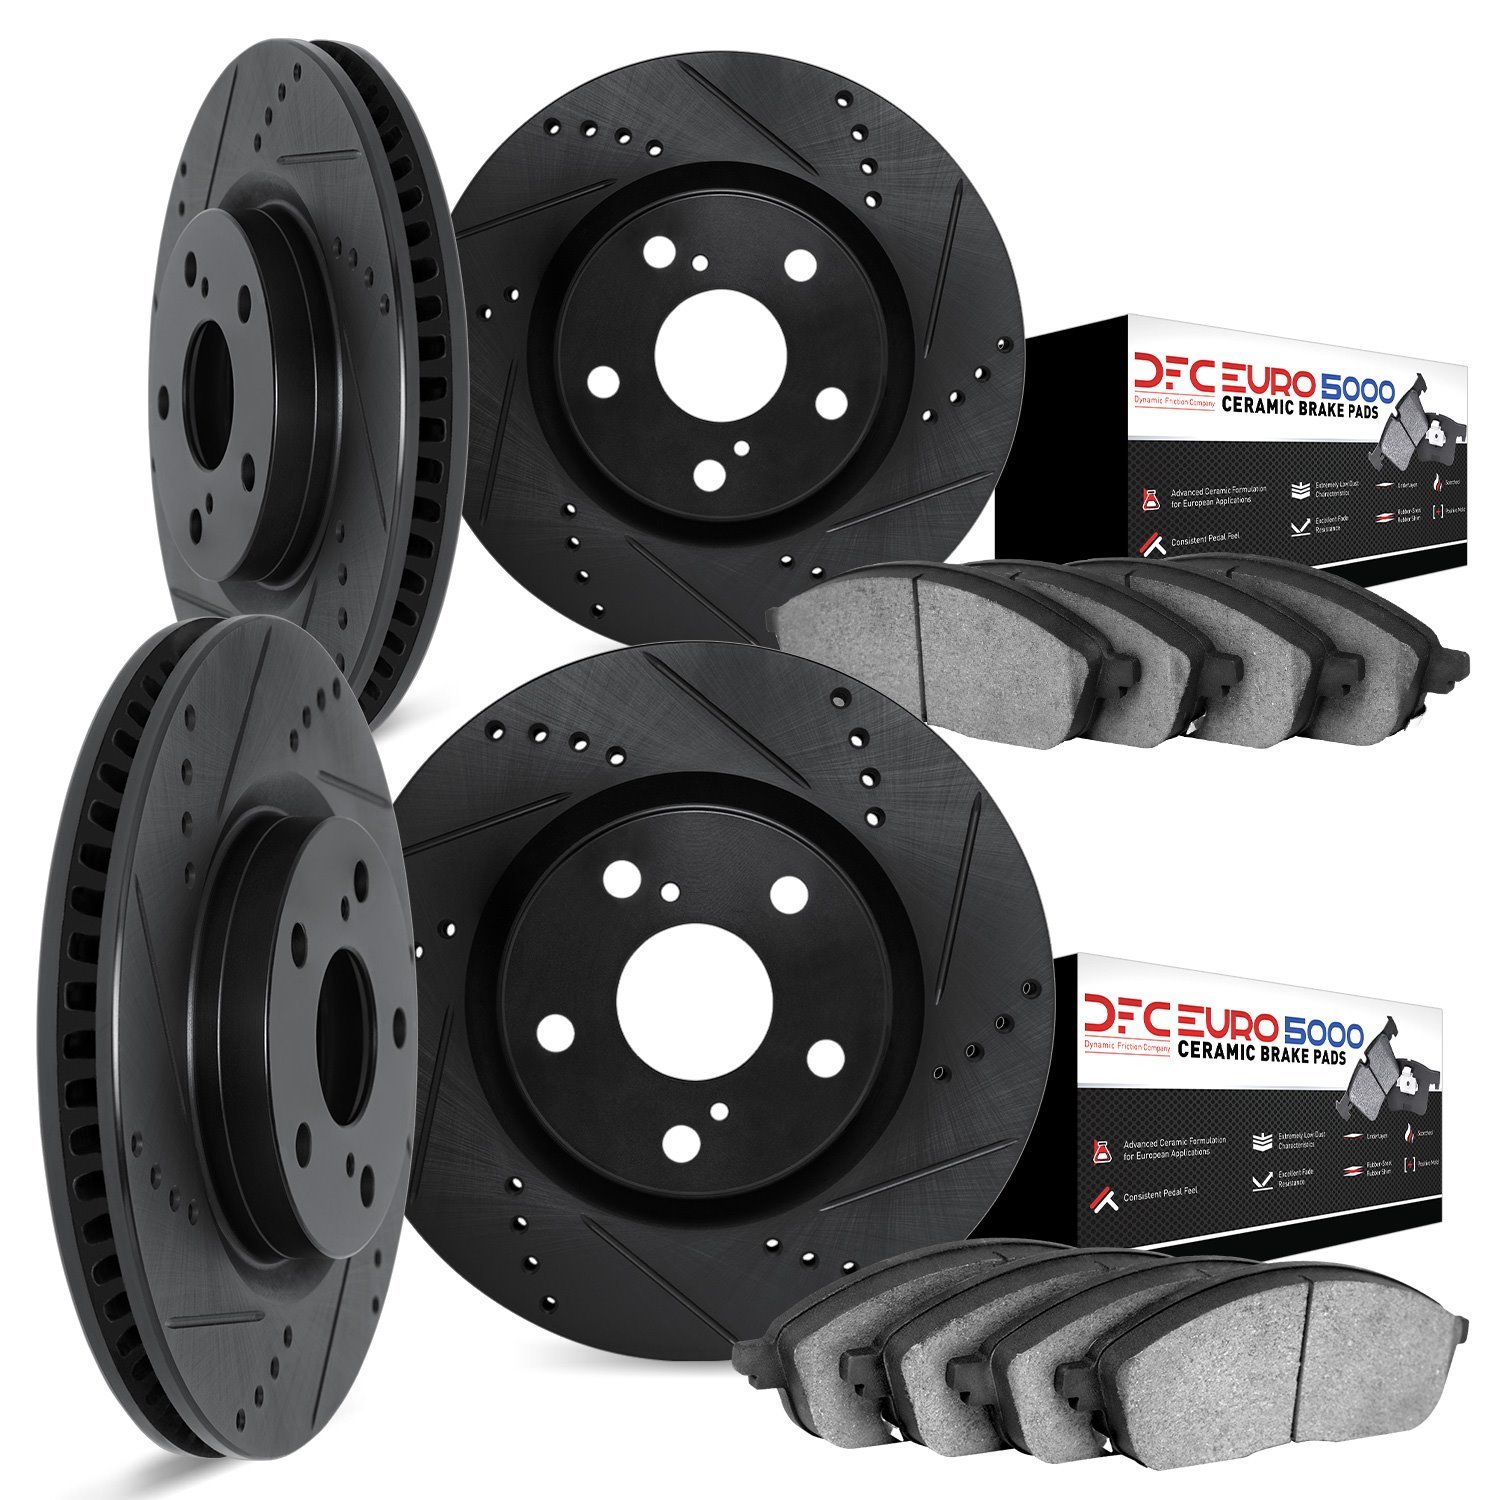 8604-02003 Drilled/Slotted Brake Rotors w/5000 Euro Ceramic Brake Pads Kit [Black], 1986-1986 Porsche, Position: Front and Rear